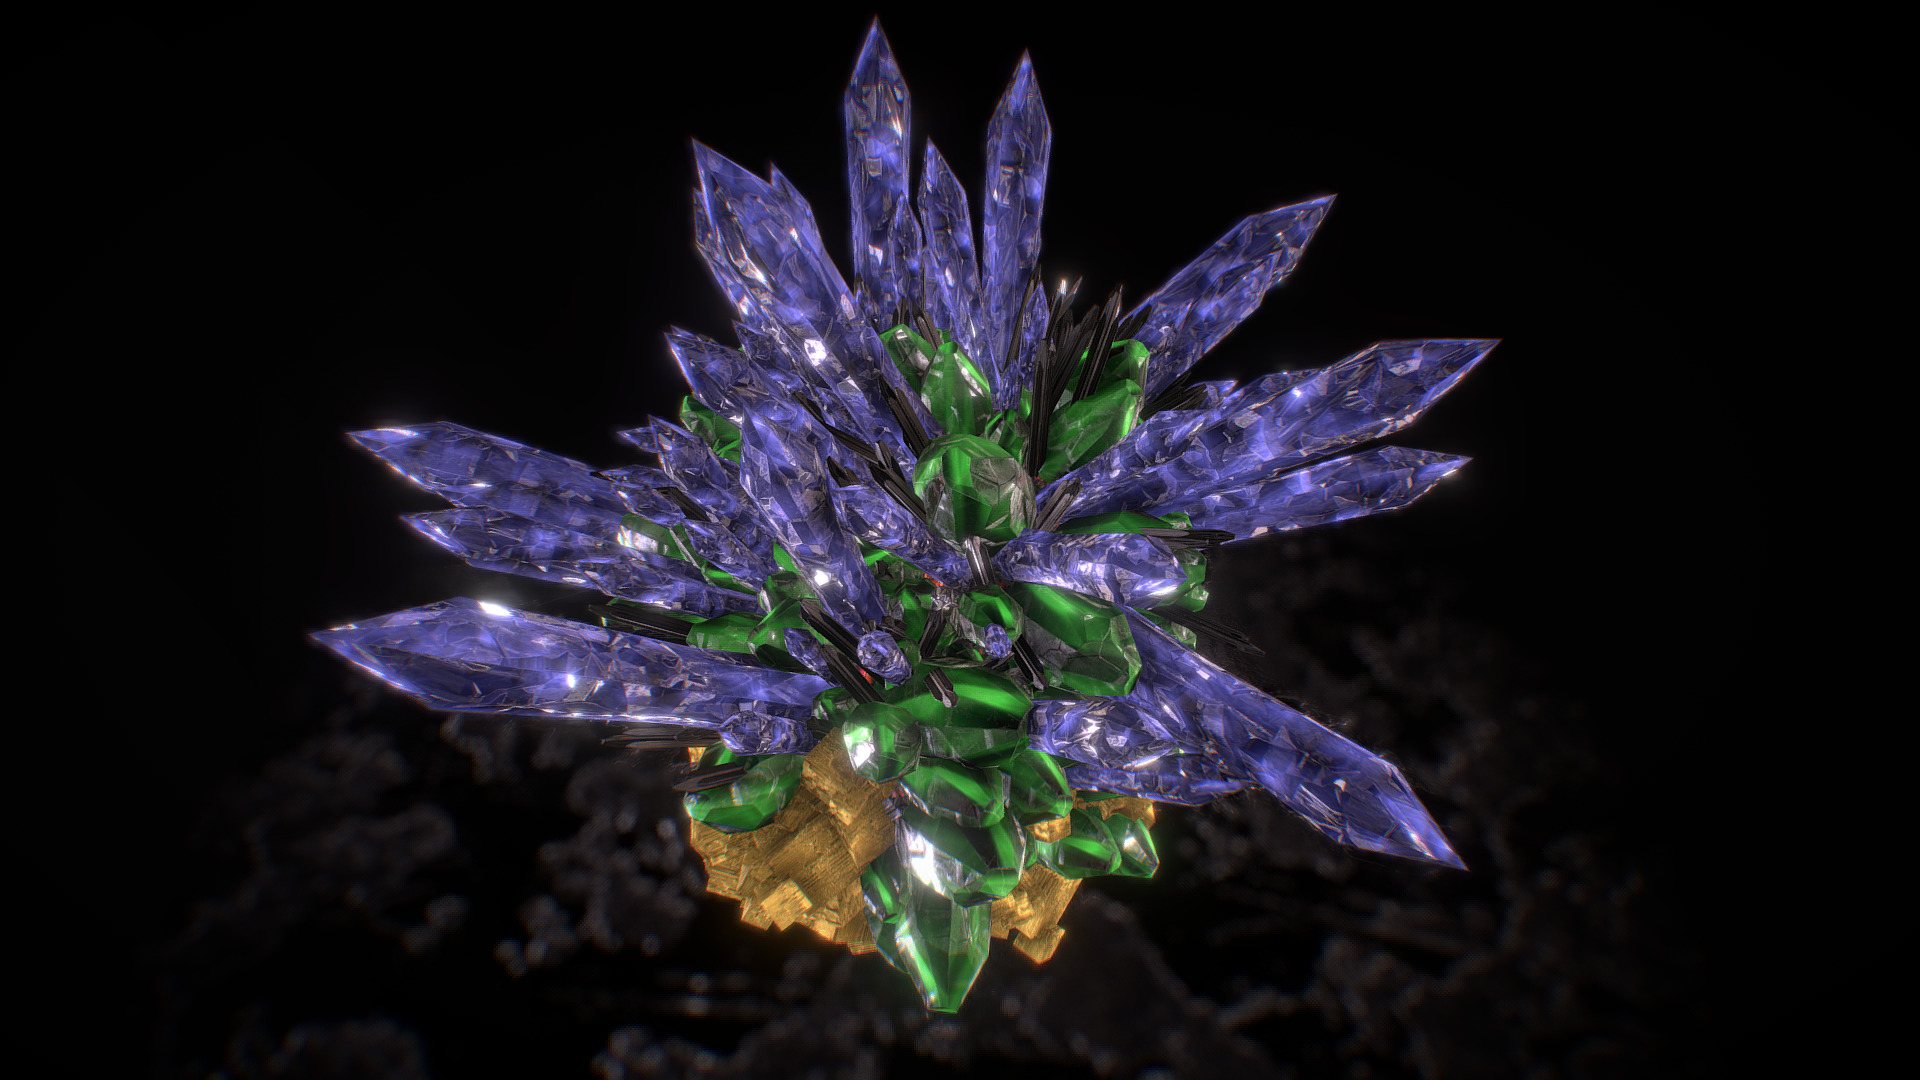 3D model Crystal Formation 3D Model - This is a 3D model of the Crystal Formation 3D Model. The 3D model is about a purple flower with green leaves.